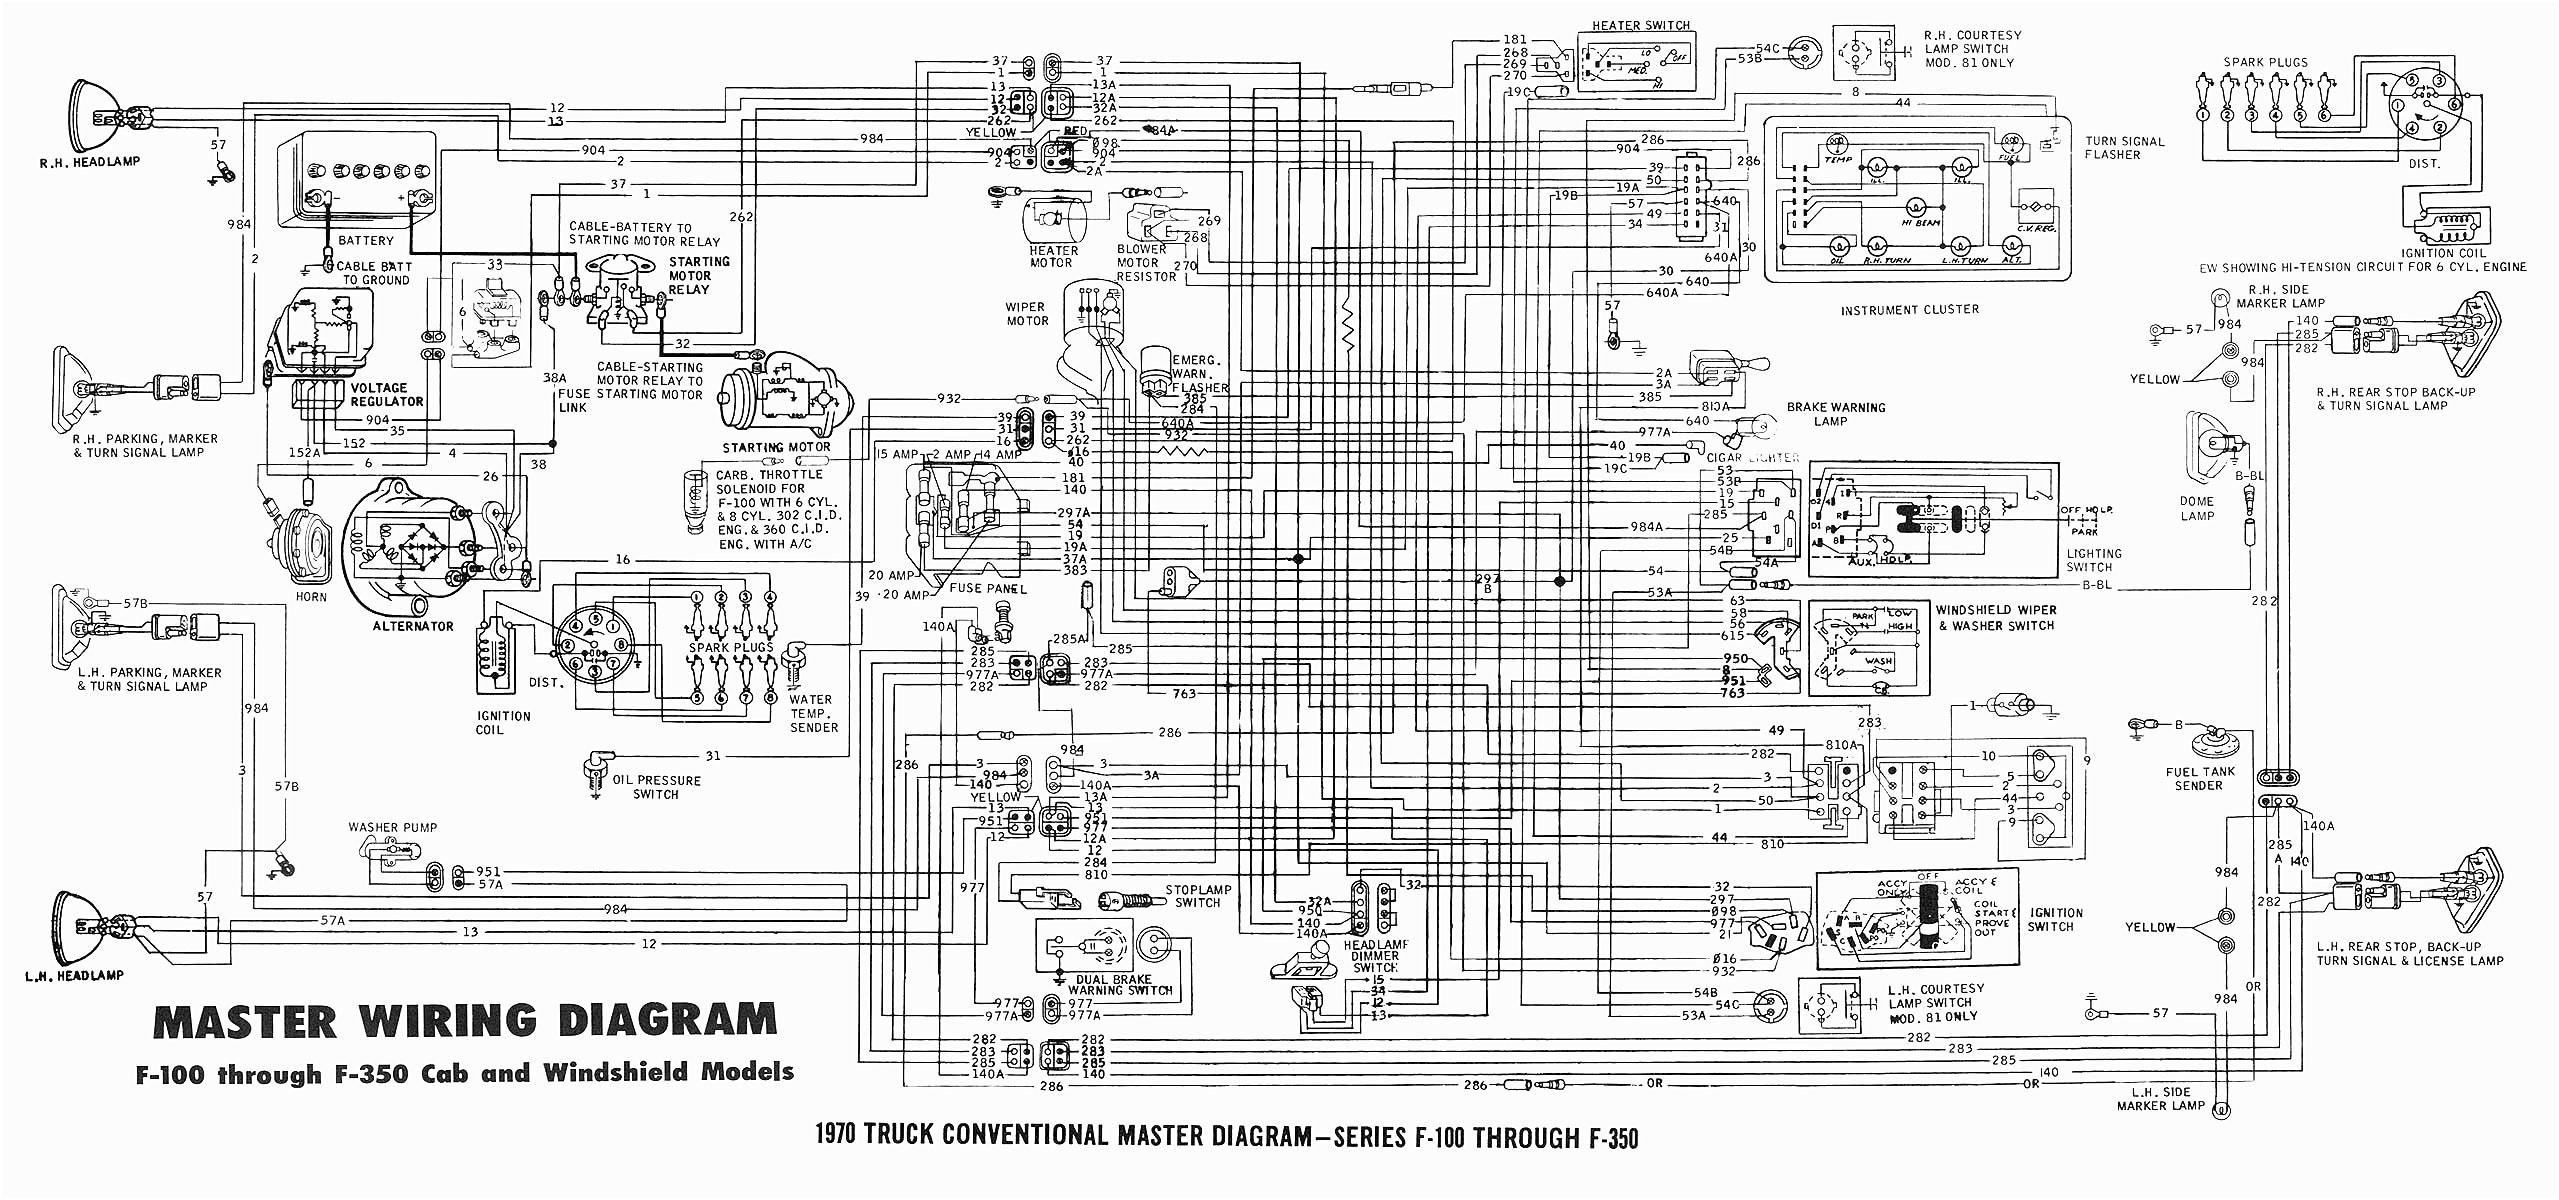 1990 ford f250 wiring diagram webtor collection of solutions 1975 for 2002 diagrams at 2002 ford f250 wiring diagram jpg